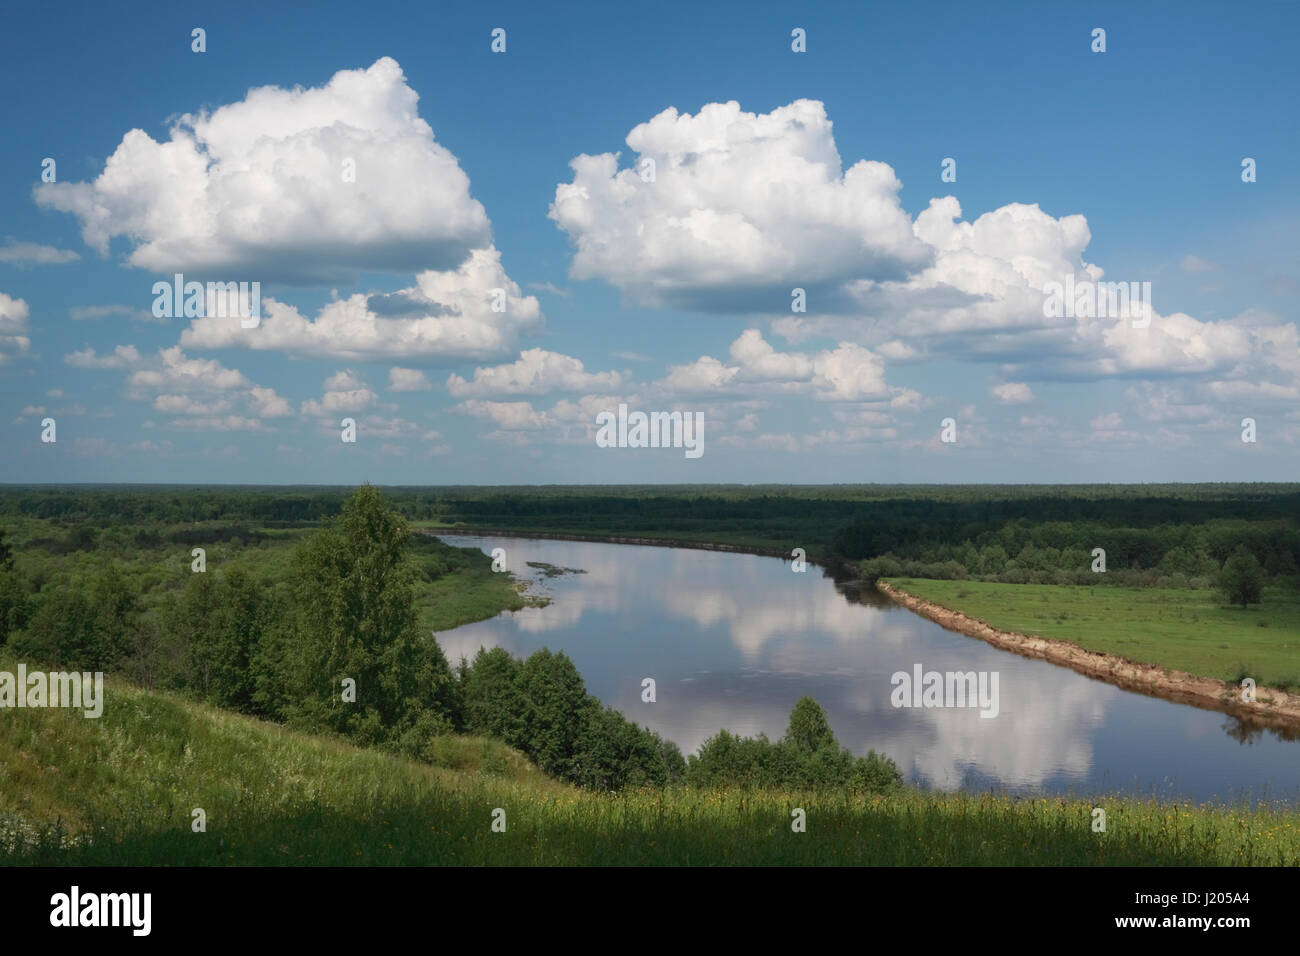 Picturesque scenery of the river Vetluga and a group of clouds above it Stock Photo